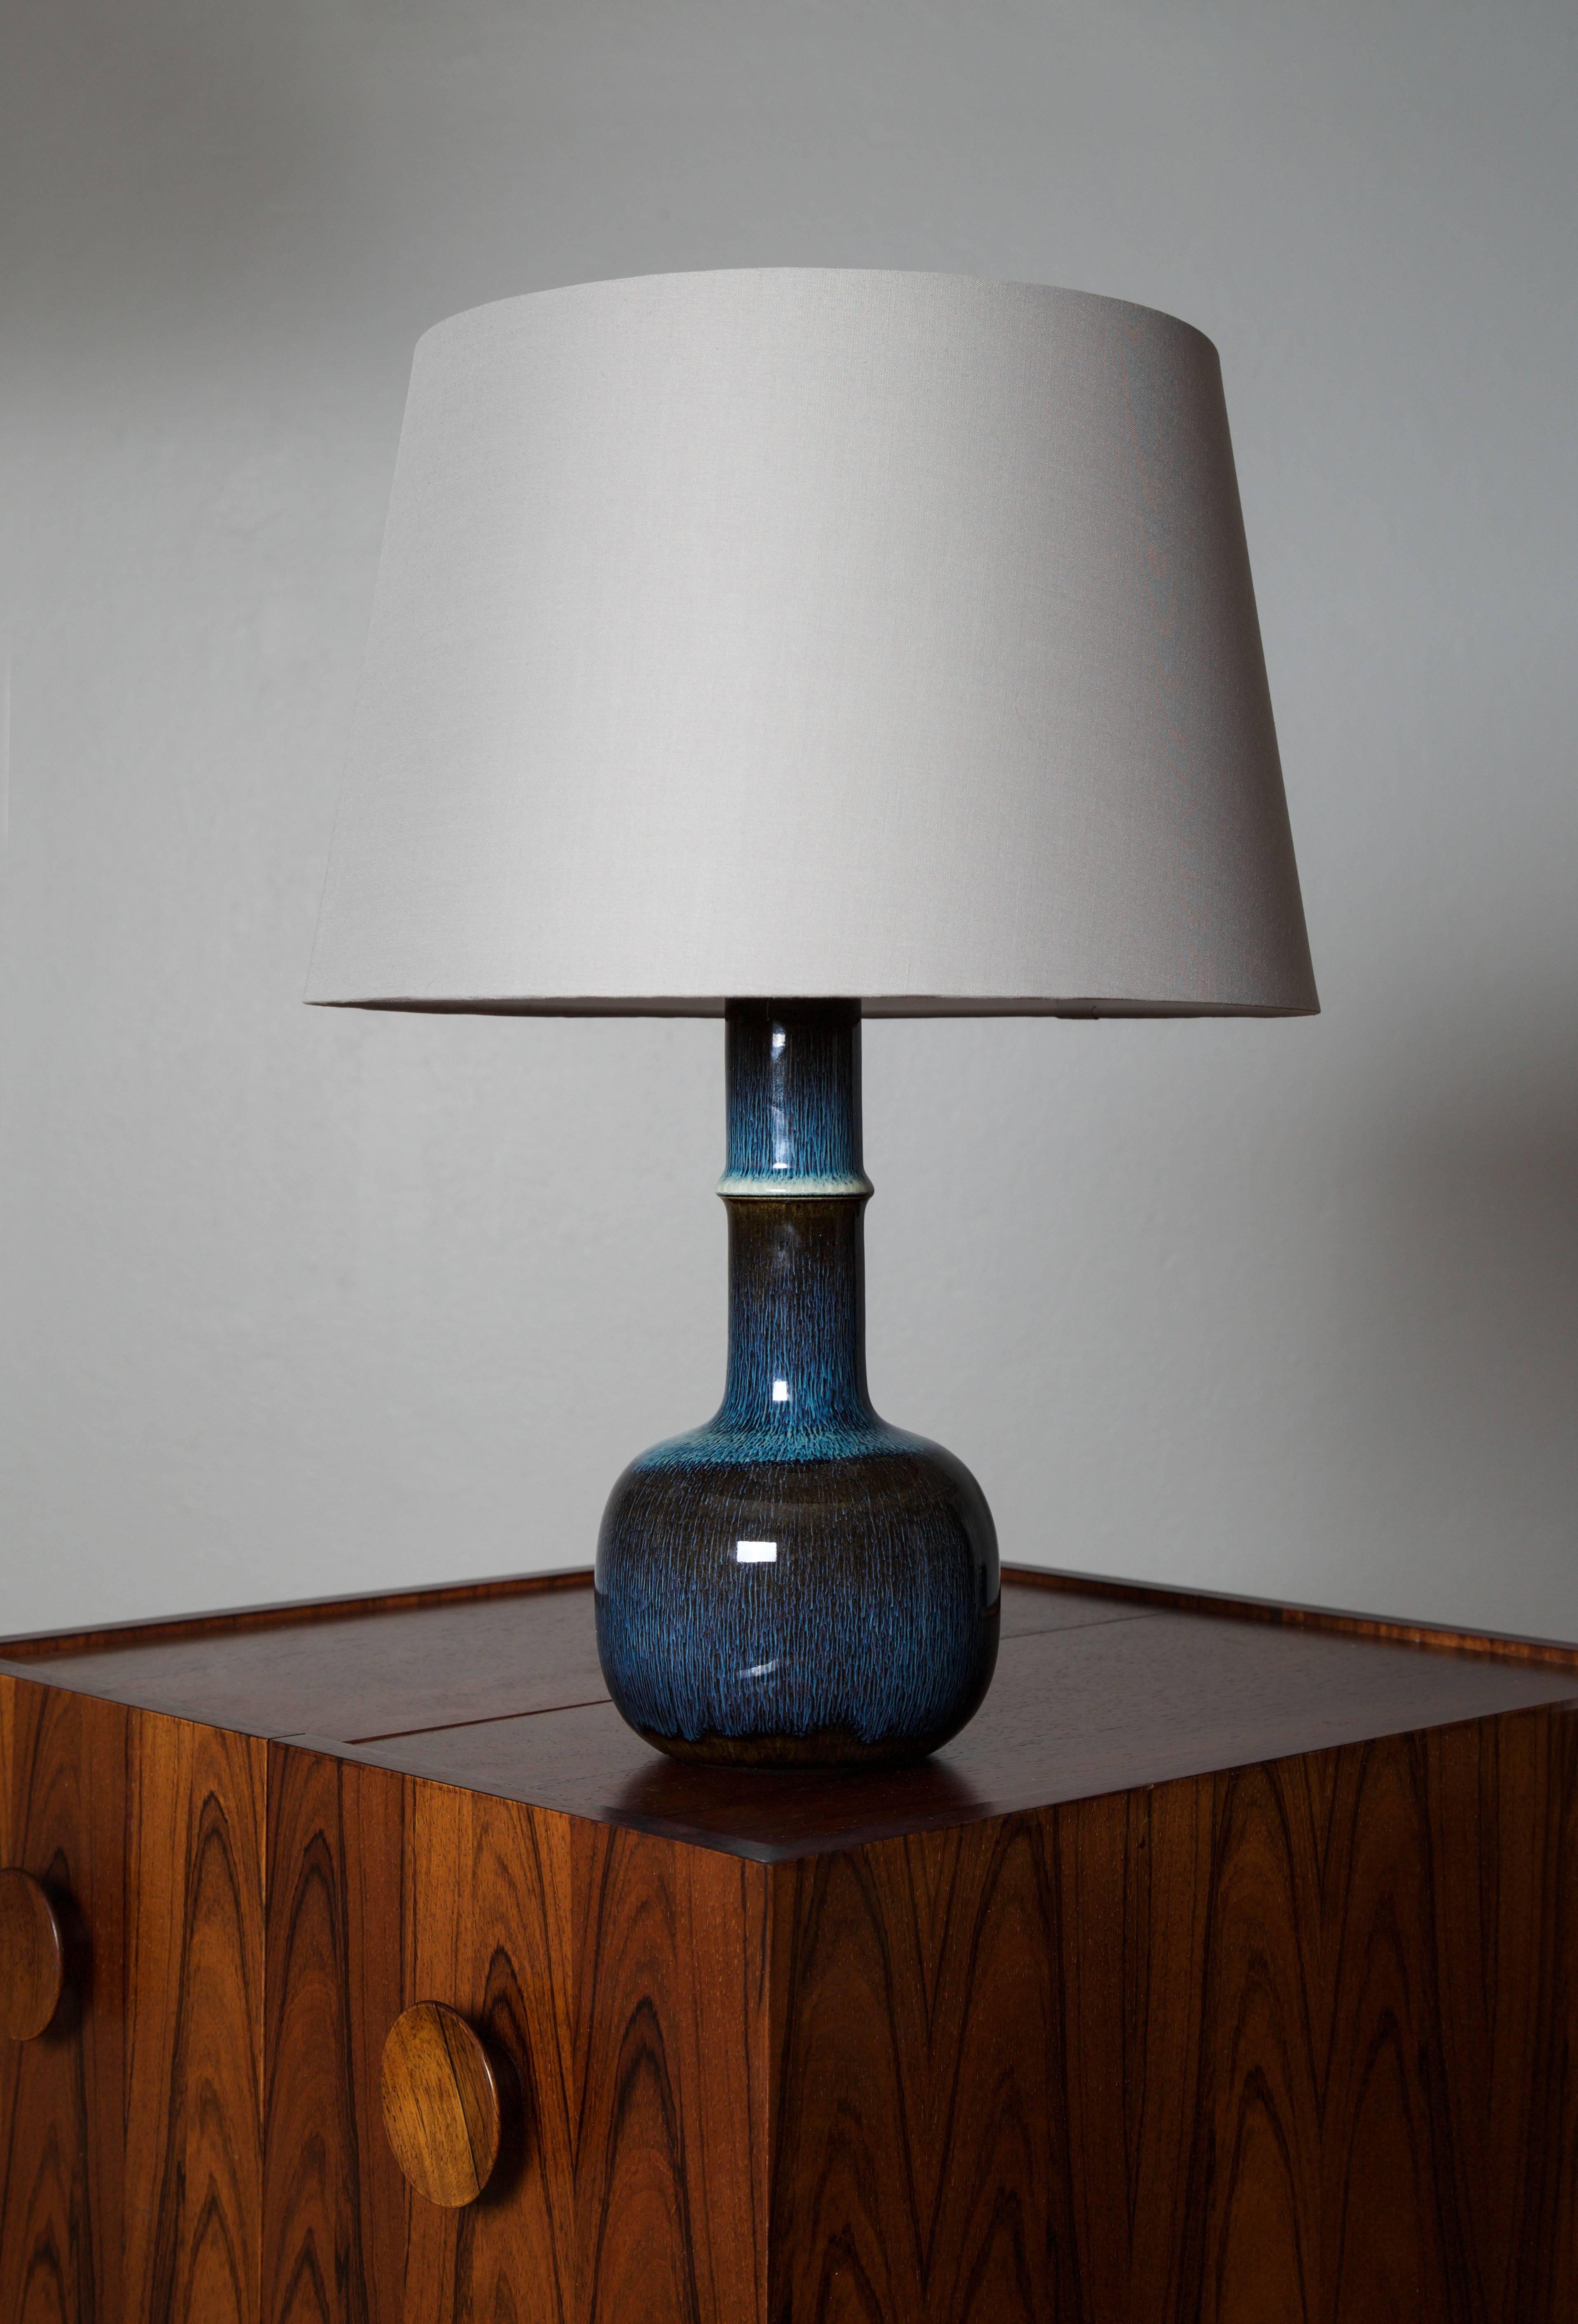 Unique ceramic table lamp by Swedish ceramist and designer Carl-Harry Stålhane.

Handmade by Rörstrand Ab's Art department in cooperation with the artist signature.

Sweden, circa 1950s.

Signed by Stålhane underside with signature, Rörstrand